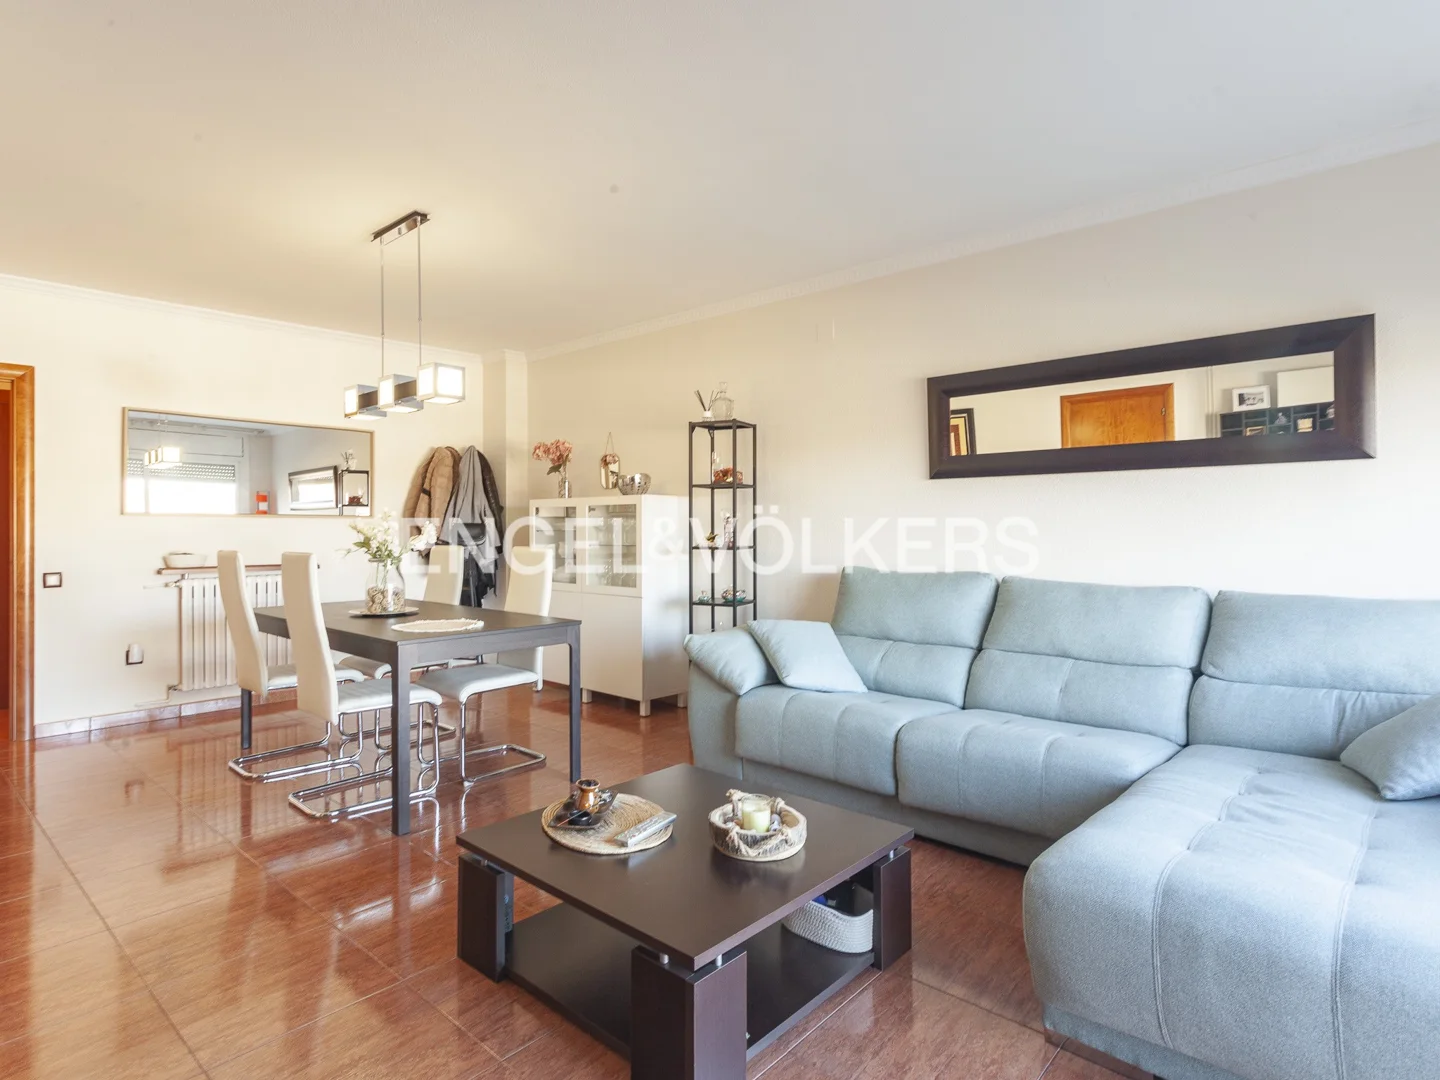 Fantastic semi-detached house in the center of Sant Quirze